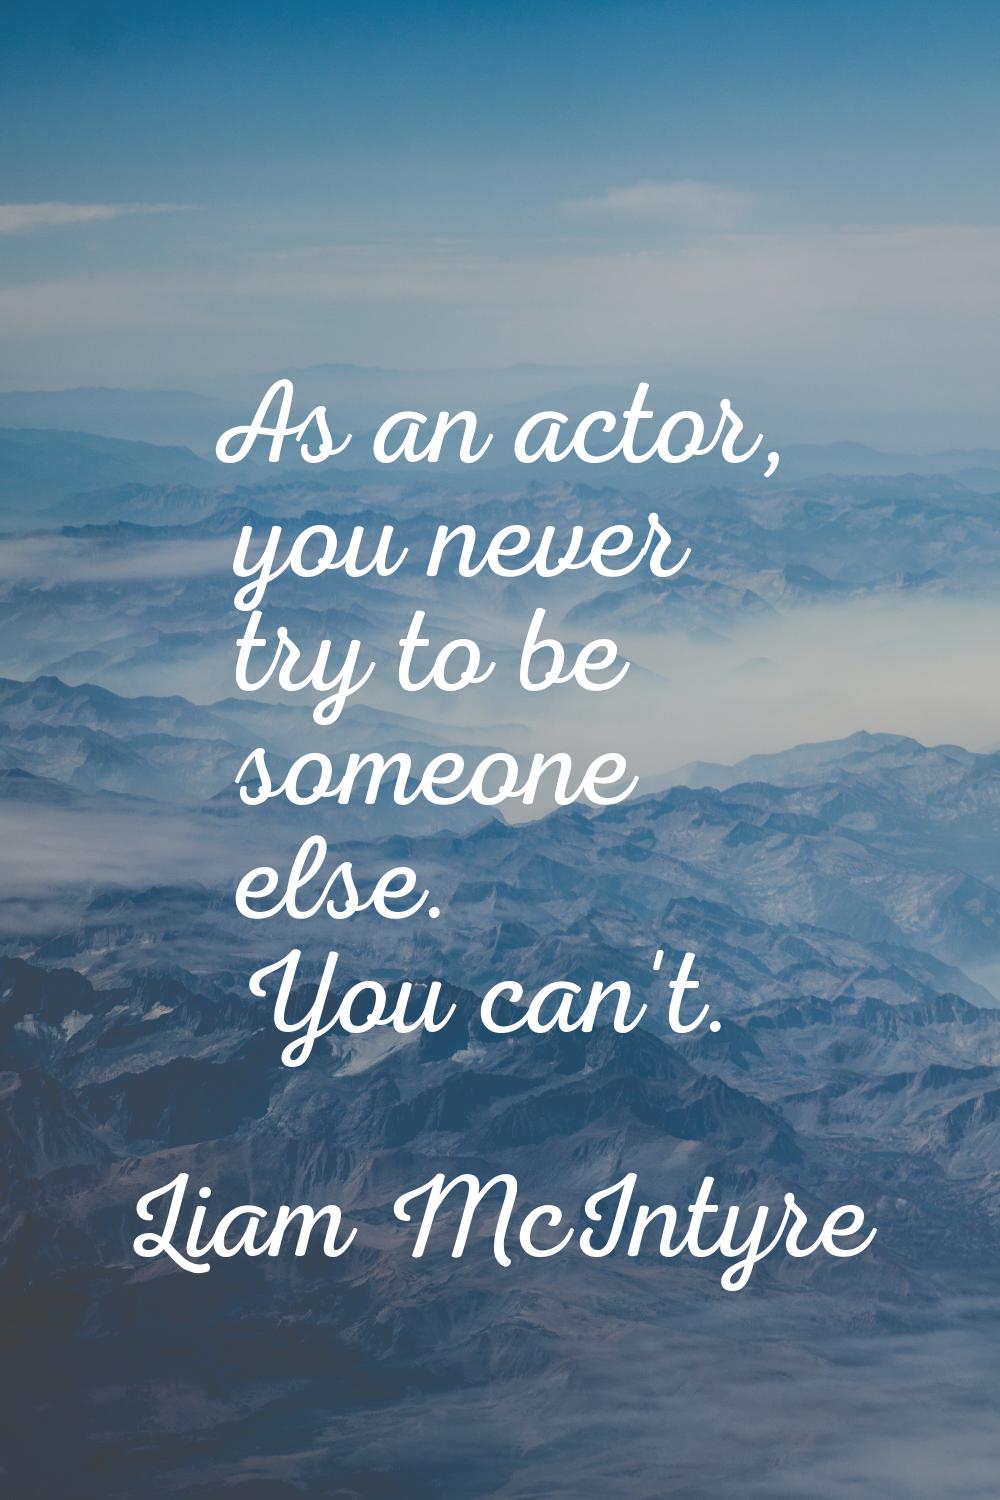 As an actor, you never try to be someone else. You can't.